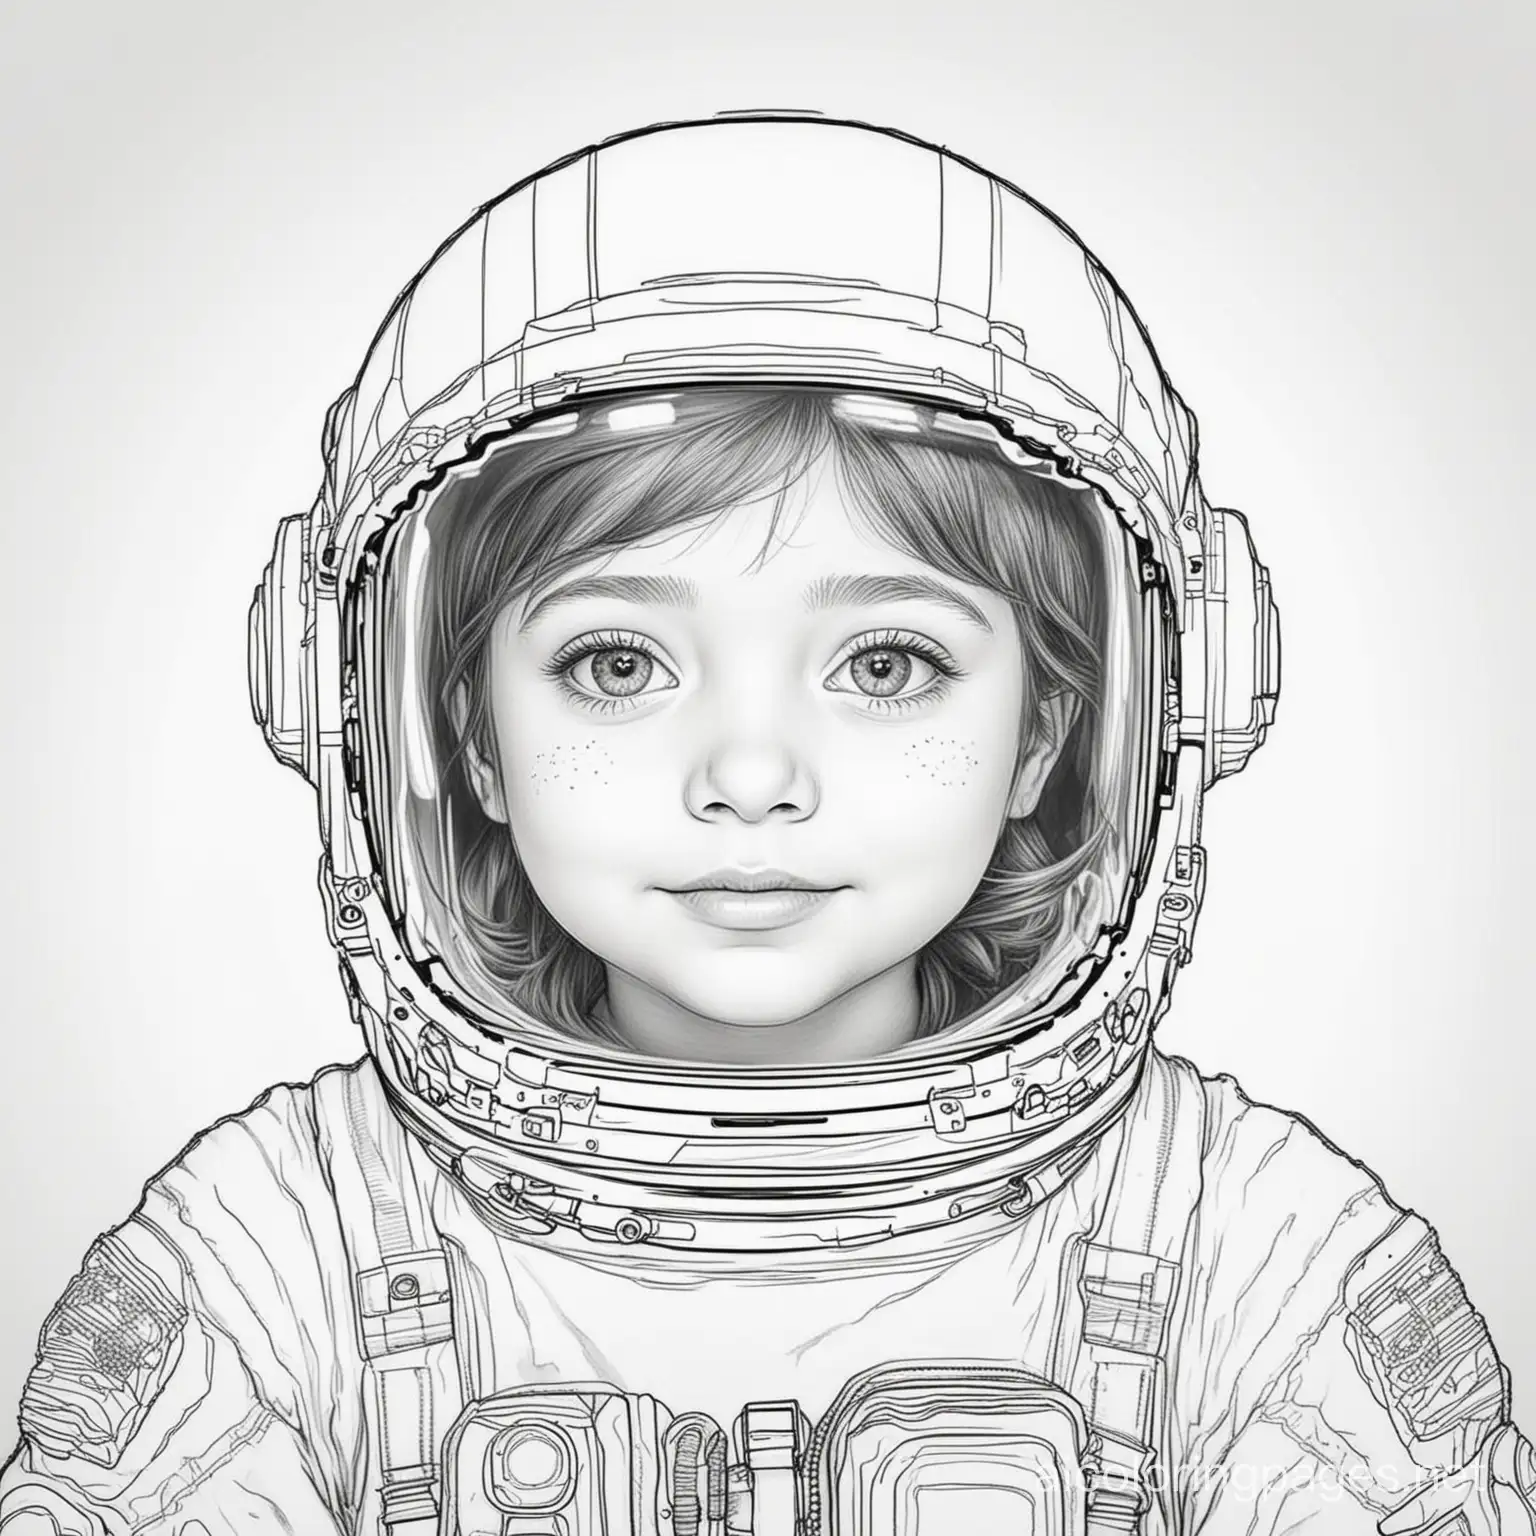 Astronaut, Coloring Page, black and white, line art, white background, Simplicity, Ample White Space. The background of the coloring page is plain white to make it easy for young children to color within the lines. The outlines of all the subjects are easy to distinguish, making it simple for kids to color without too much difficulty